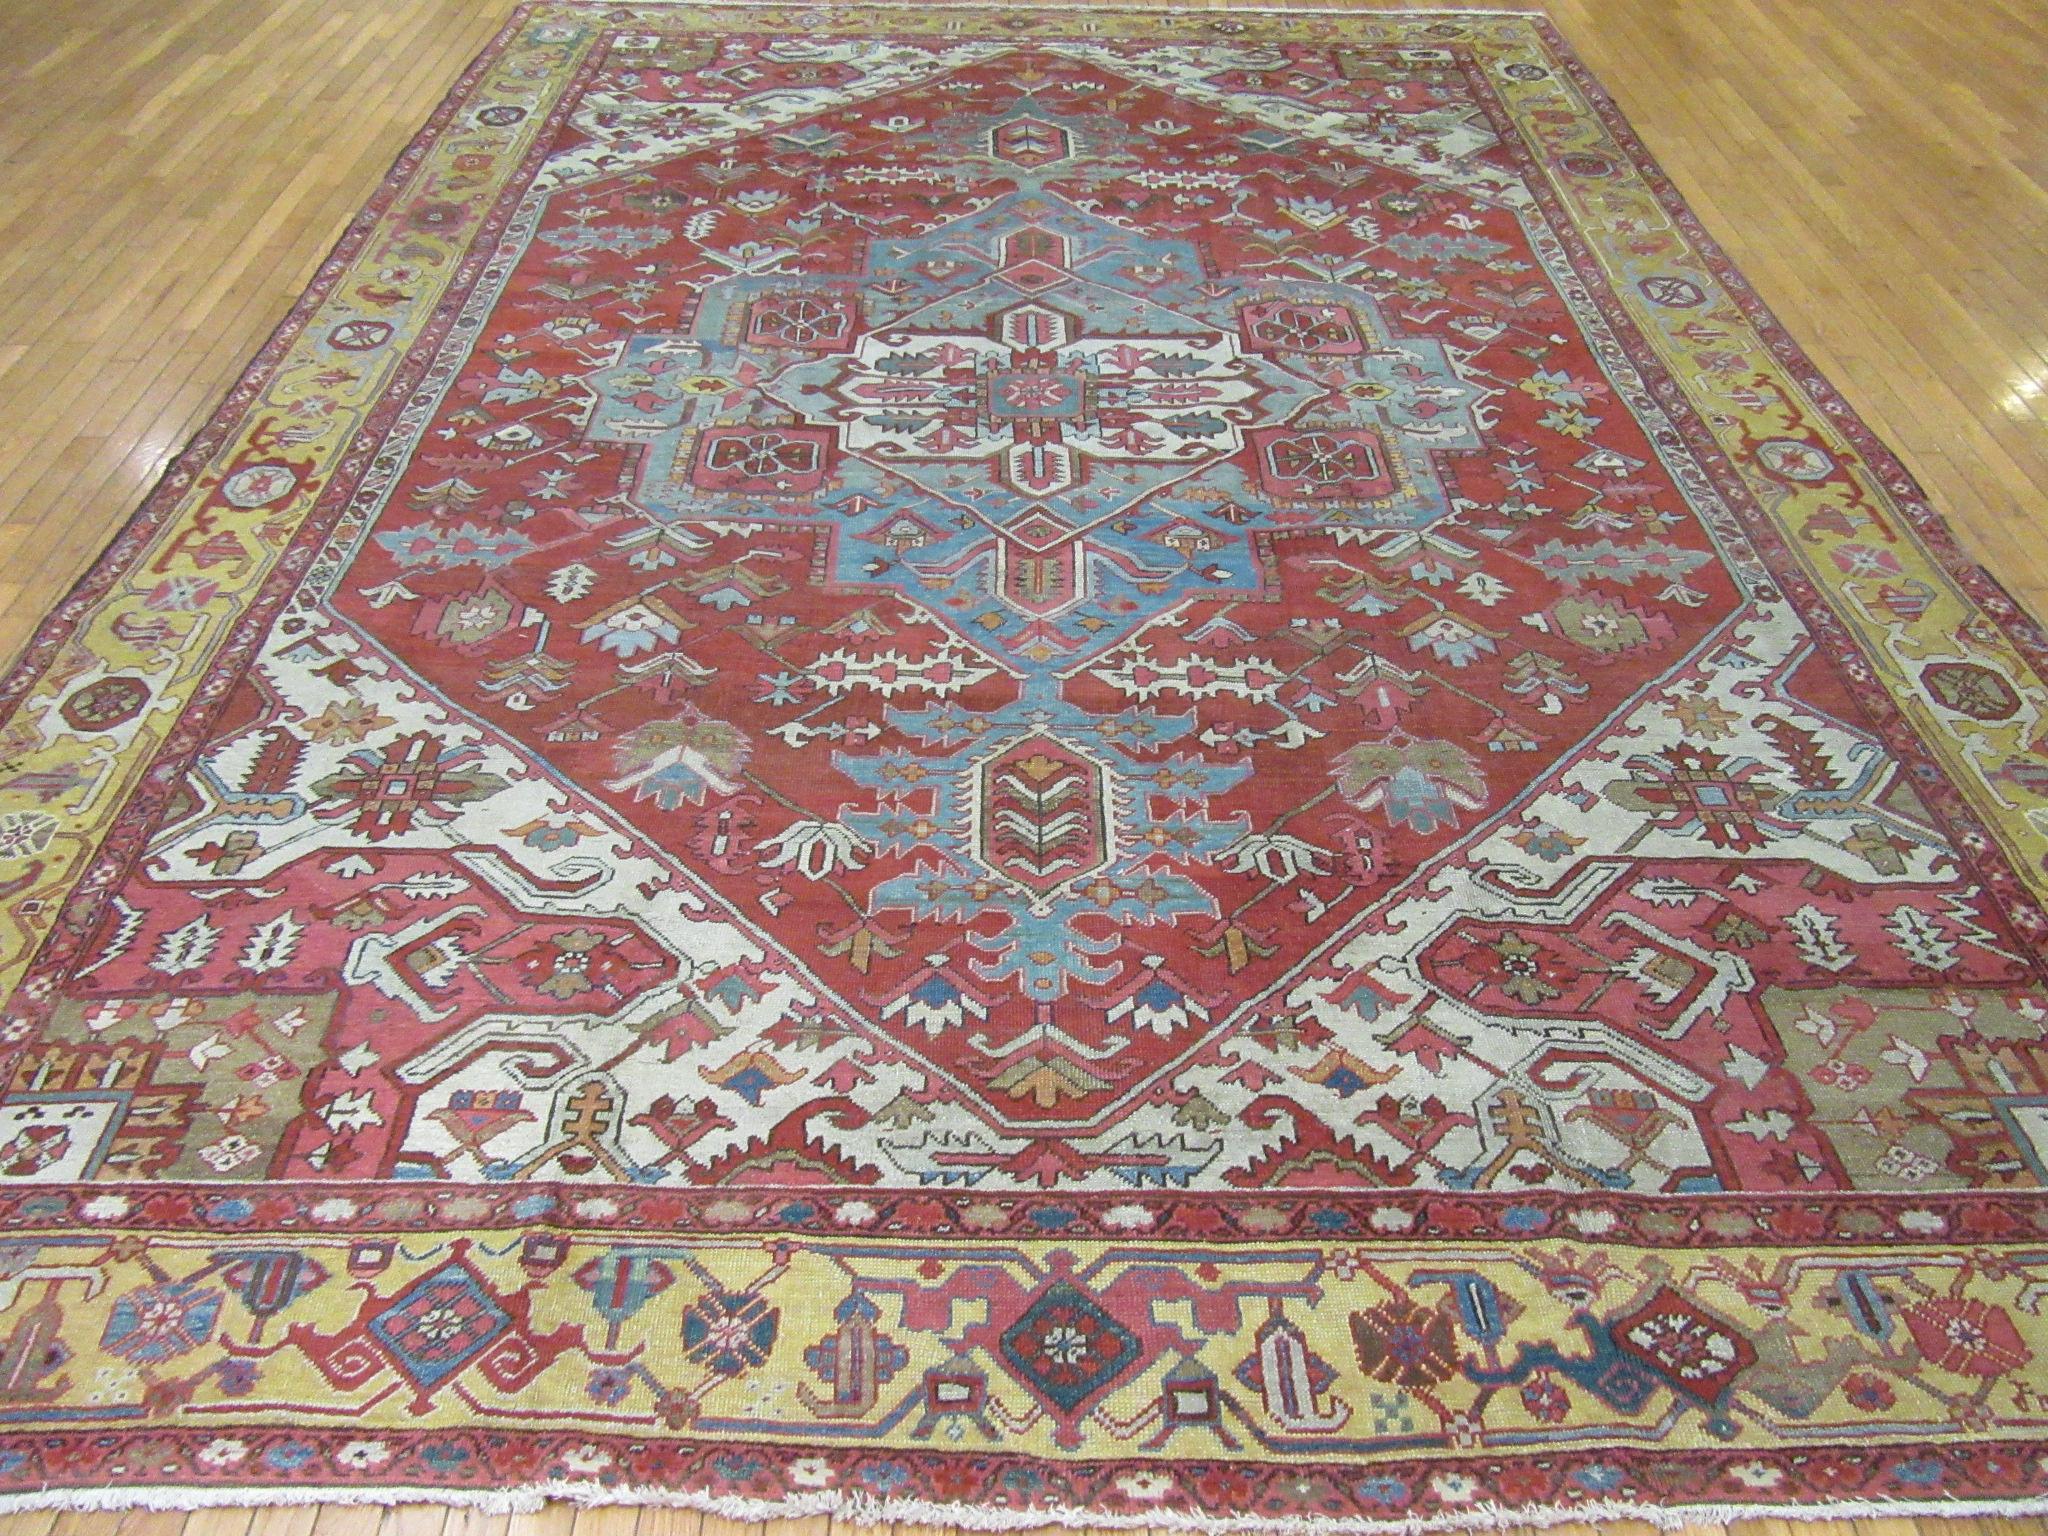 Large Room Size Antique Hand Knotted wool Red Teal and Gold Persian Serapi Rug For Sale 6